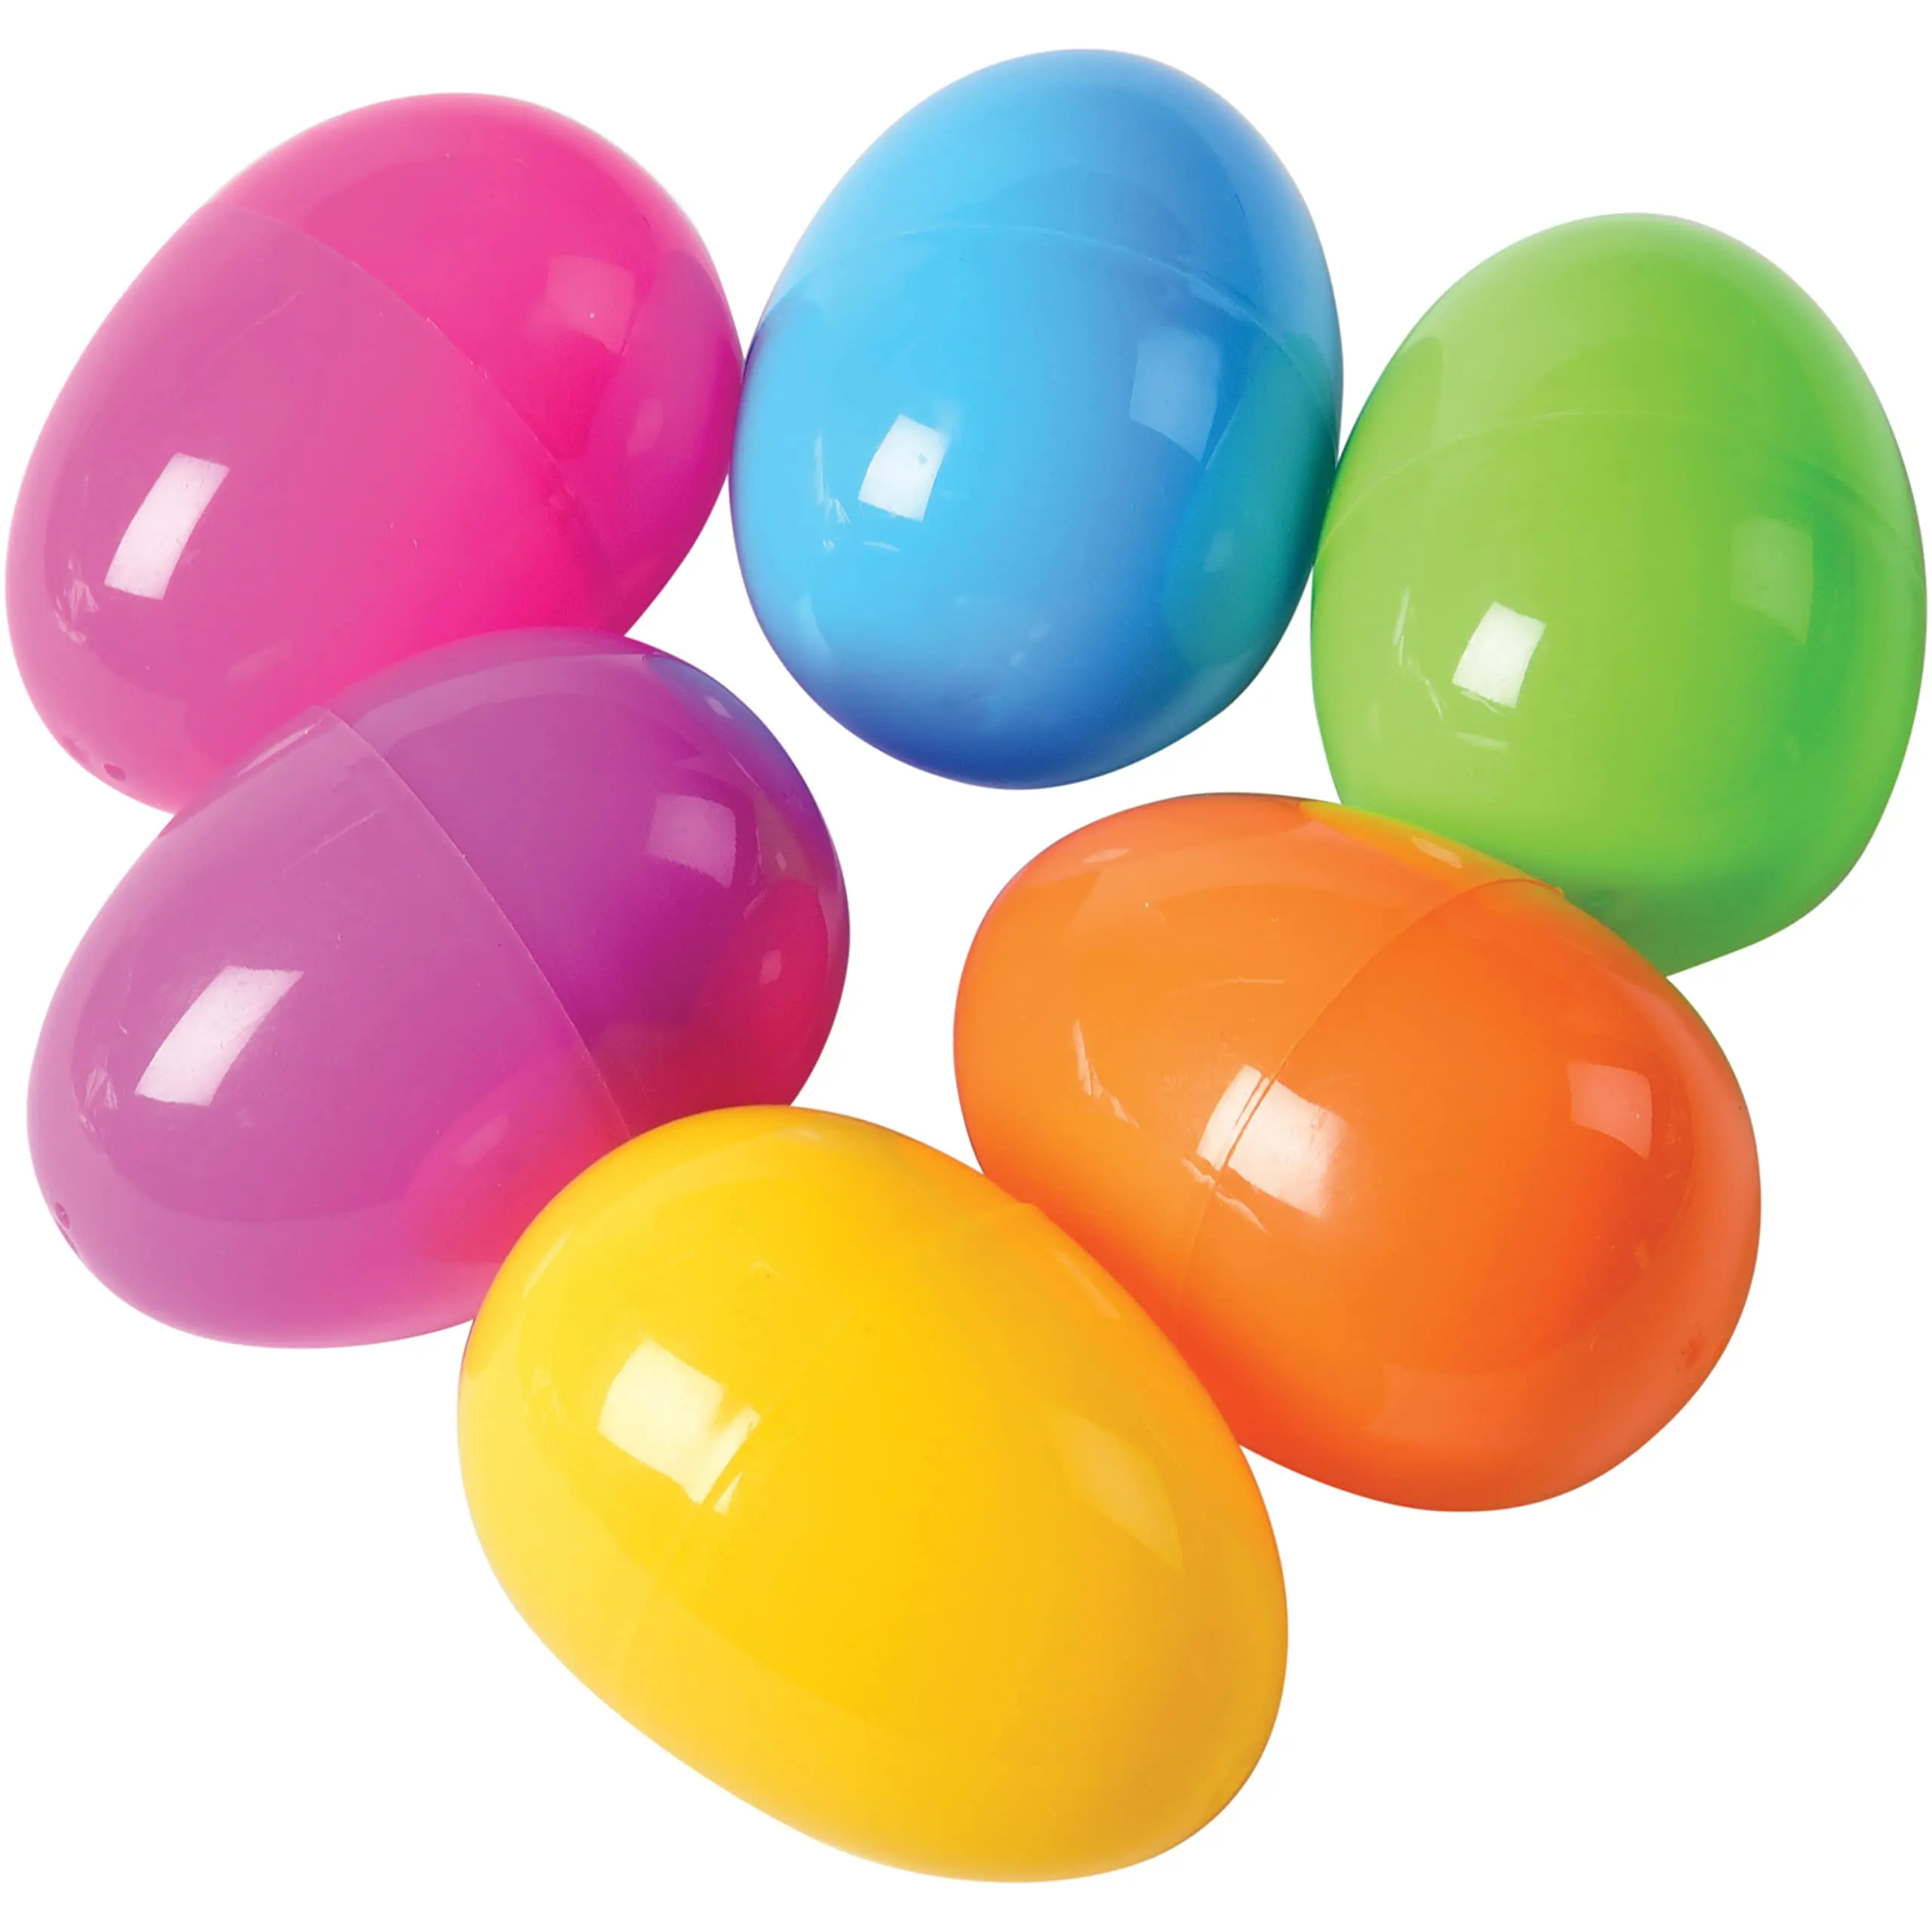 Colorful and Fun Plastic Easter Eggs Wholesale